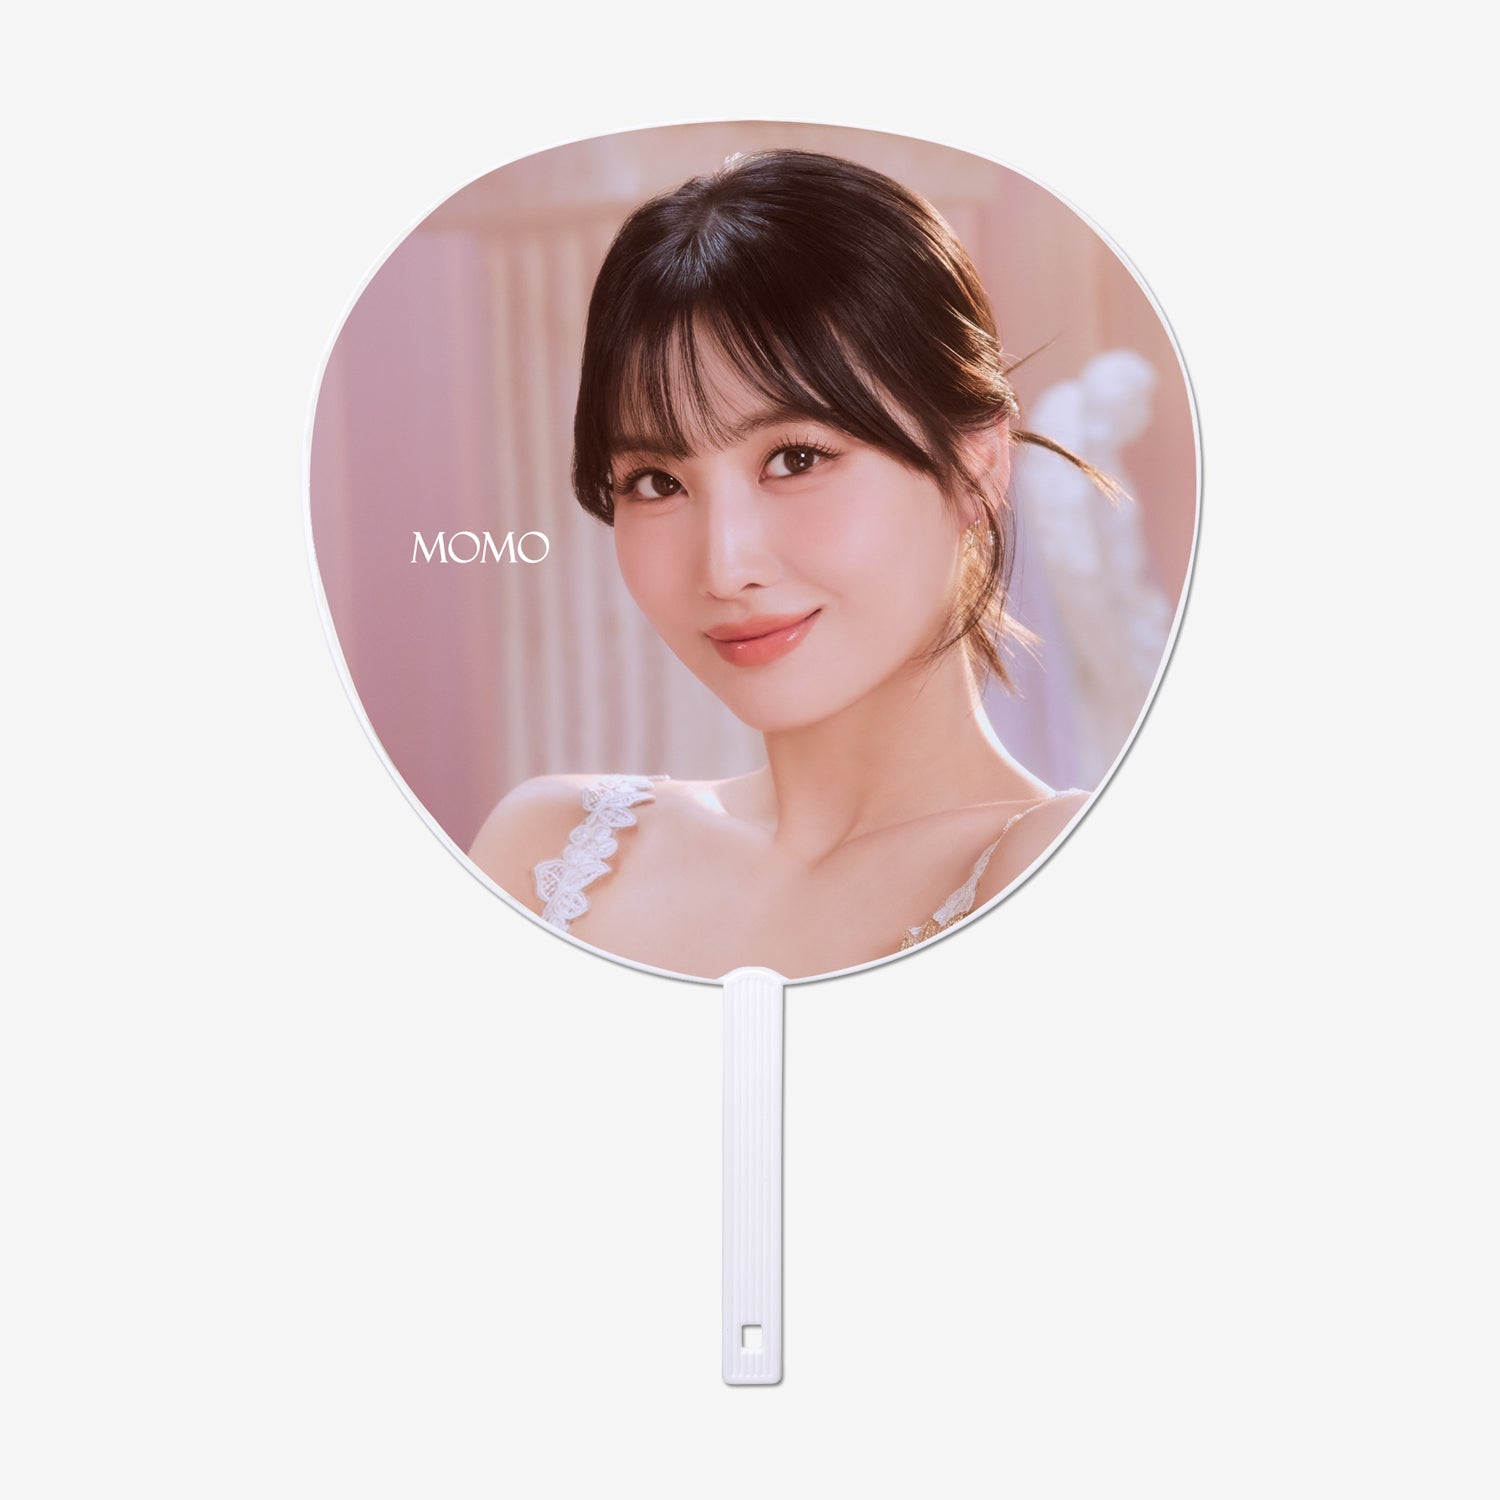 IMAGE PICKET - MOMO / TWICE『READY TO BE』